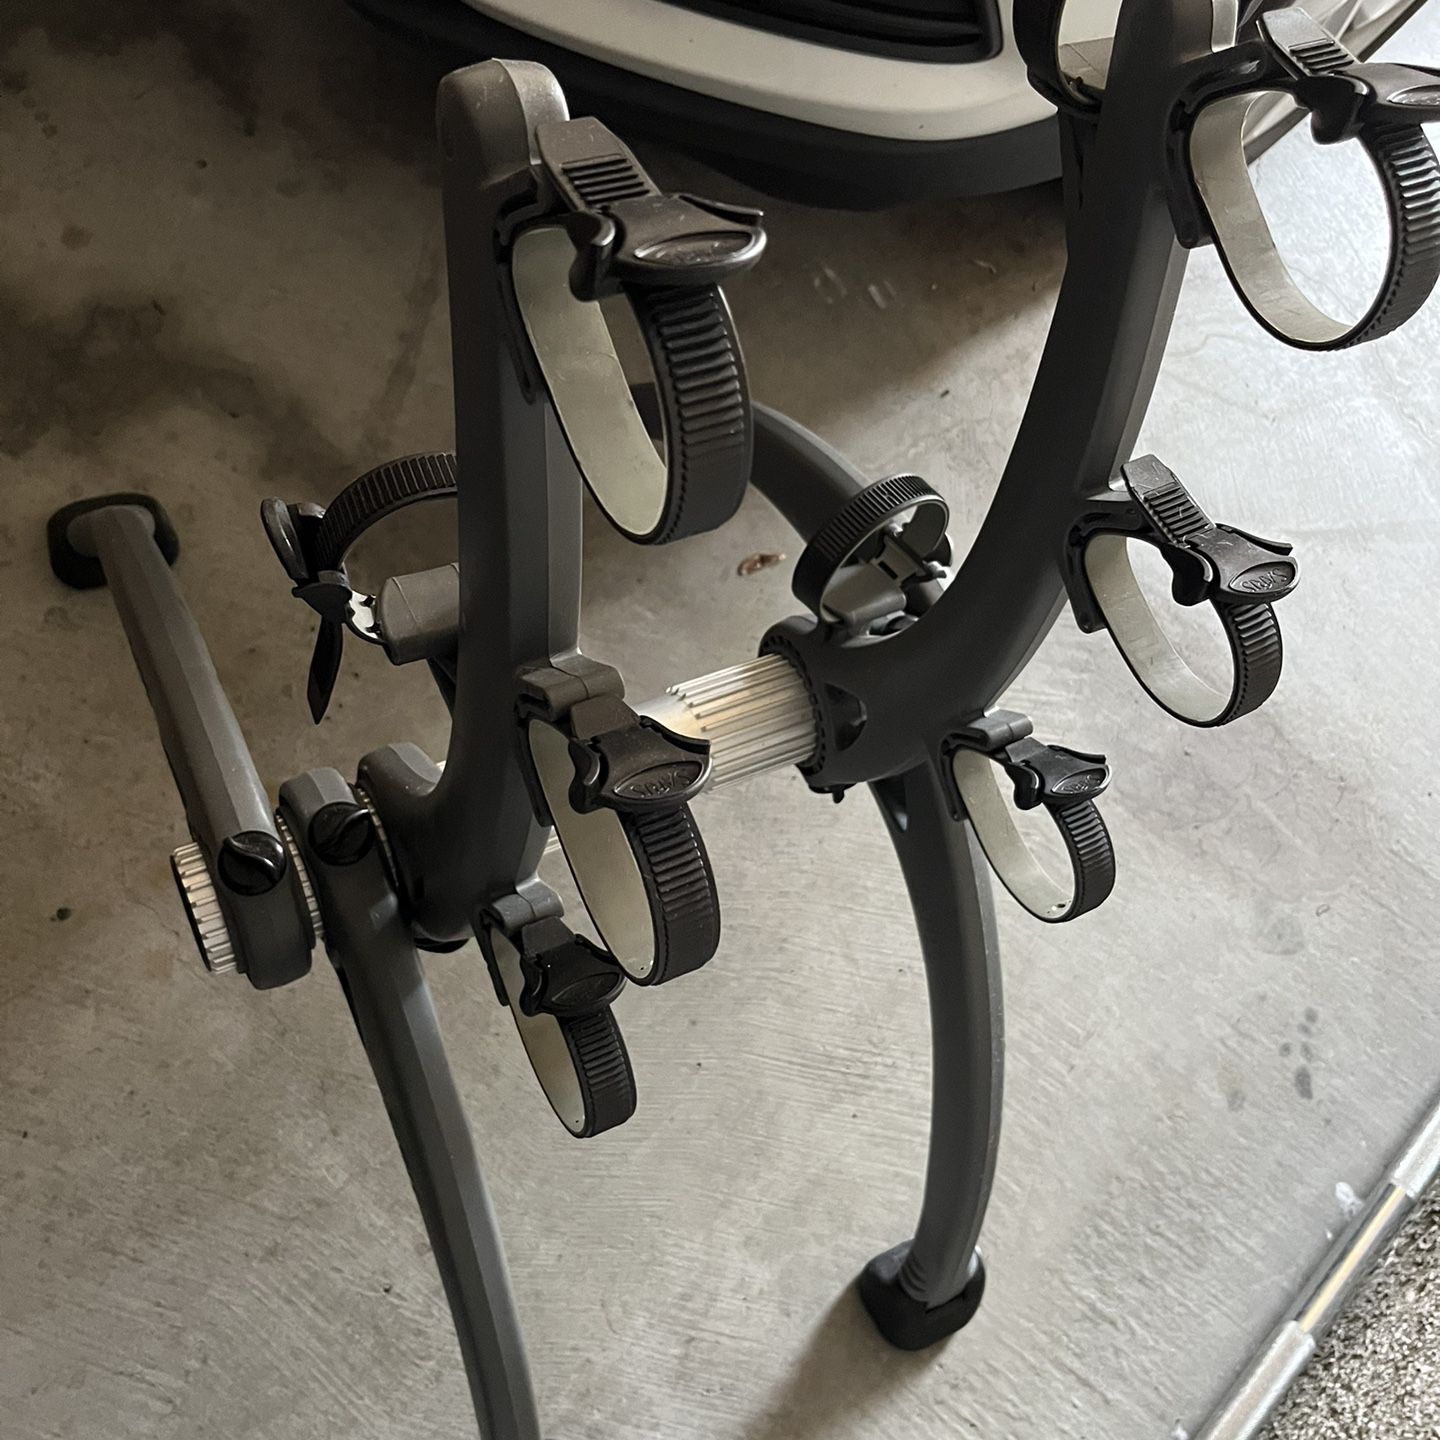 Bike Rack For Up To 3 Bikes